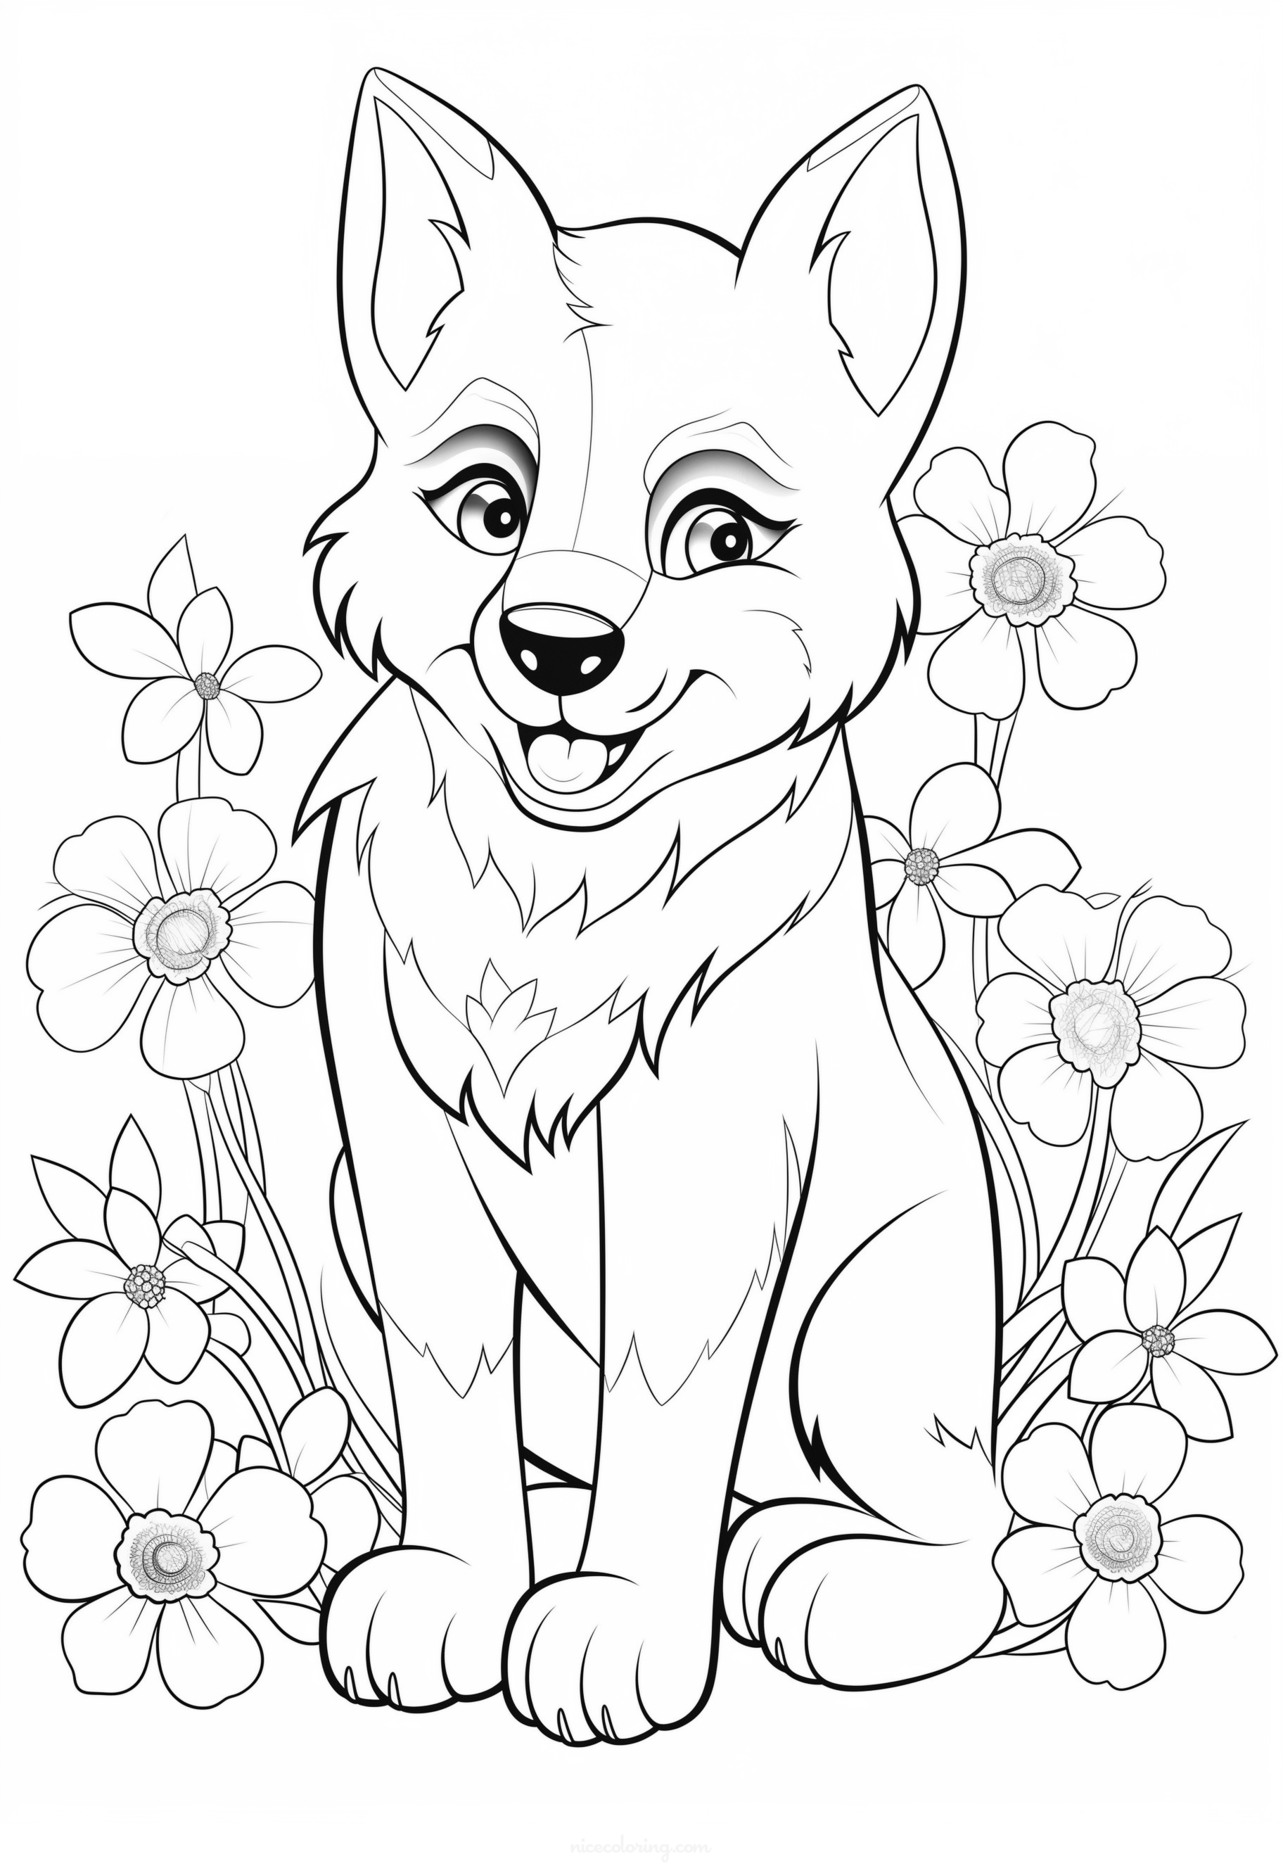 Playful dog with a ball coloring page